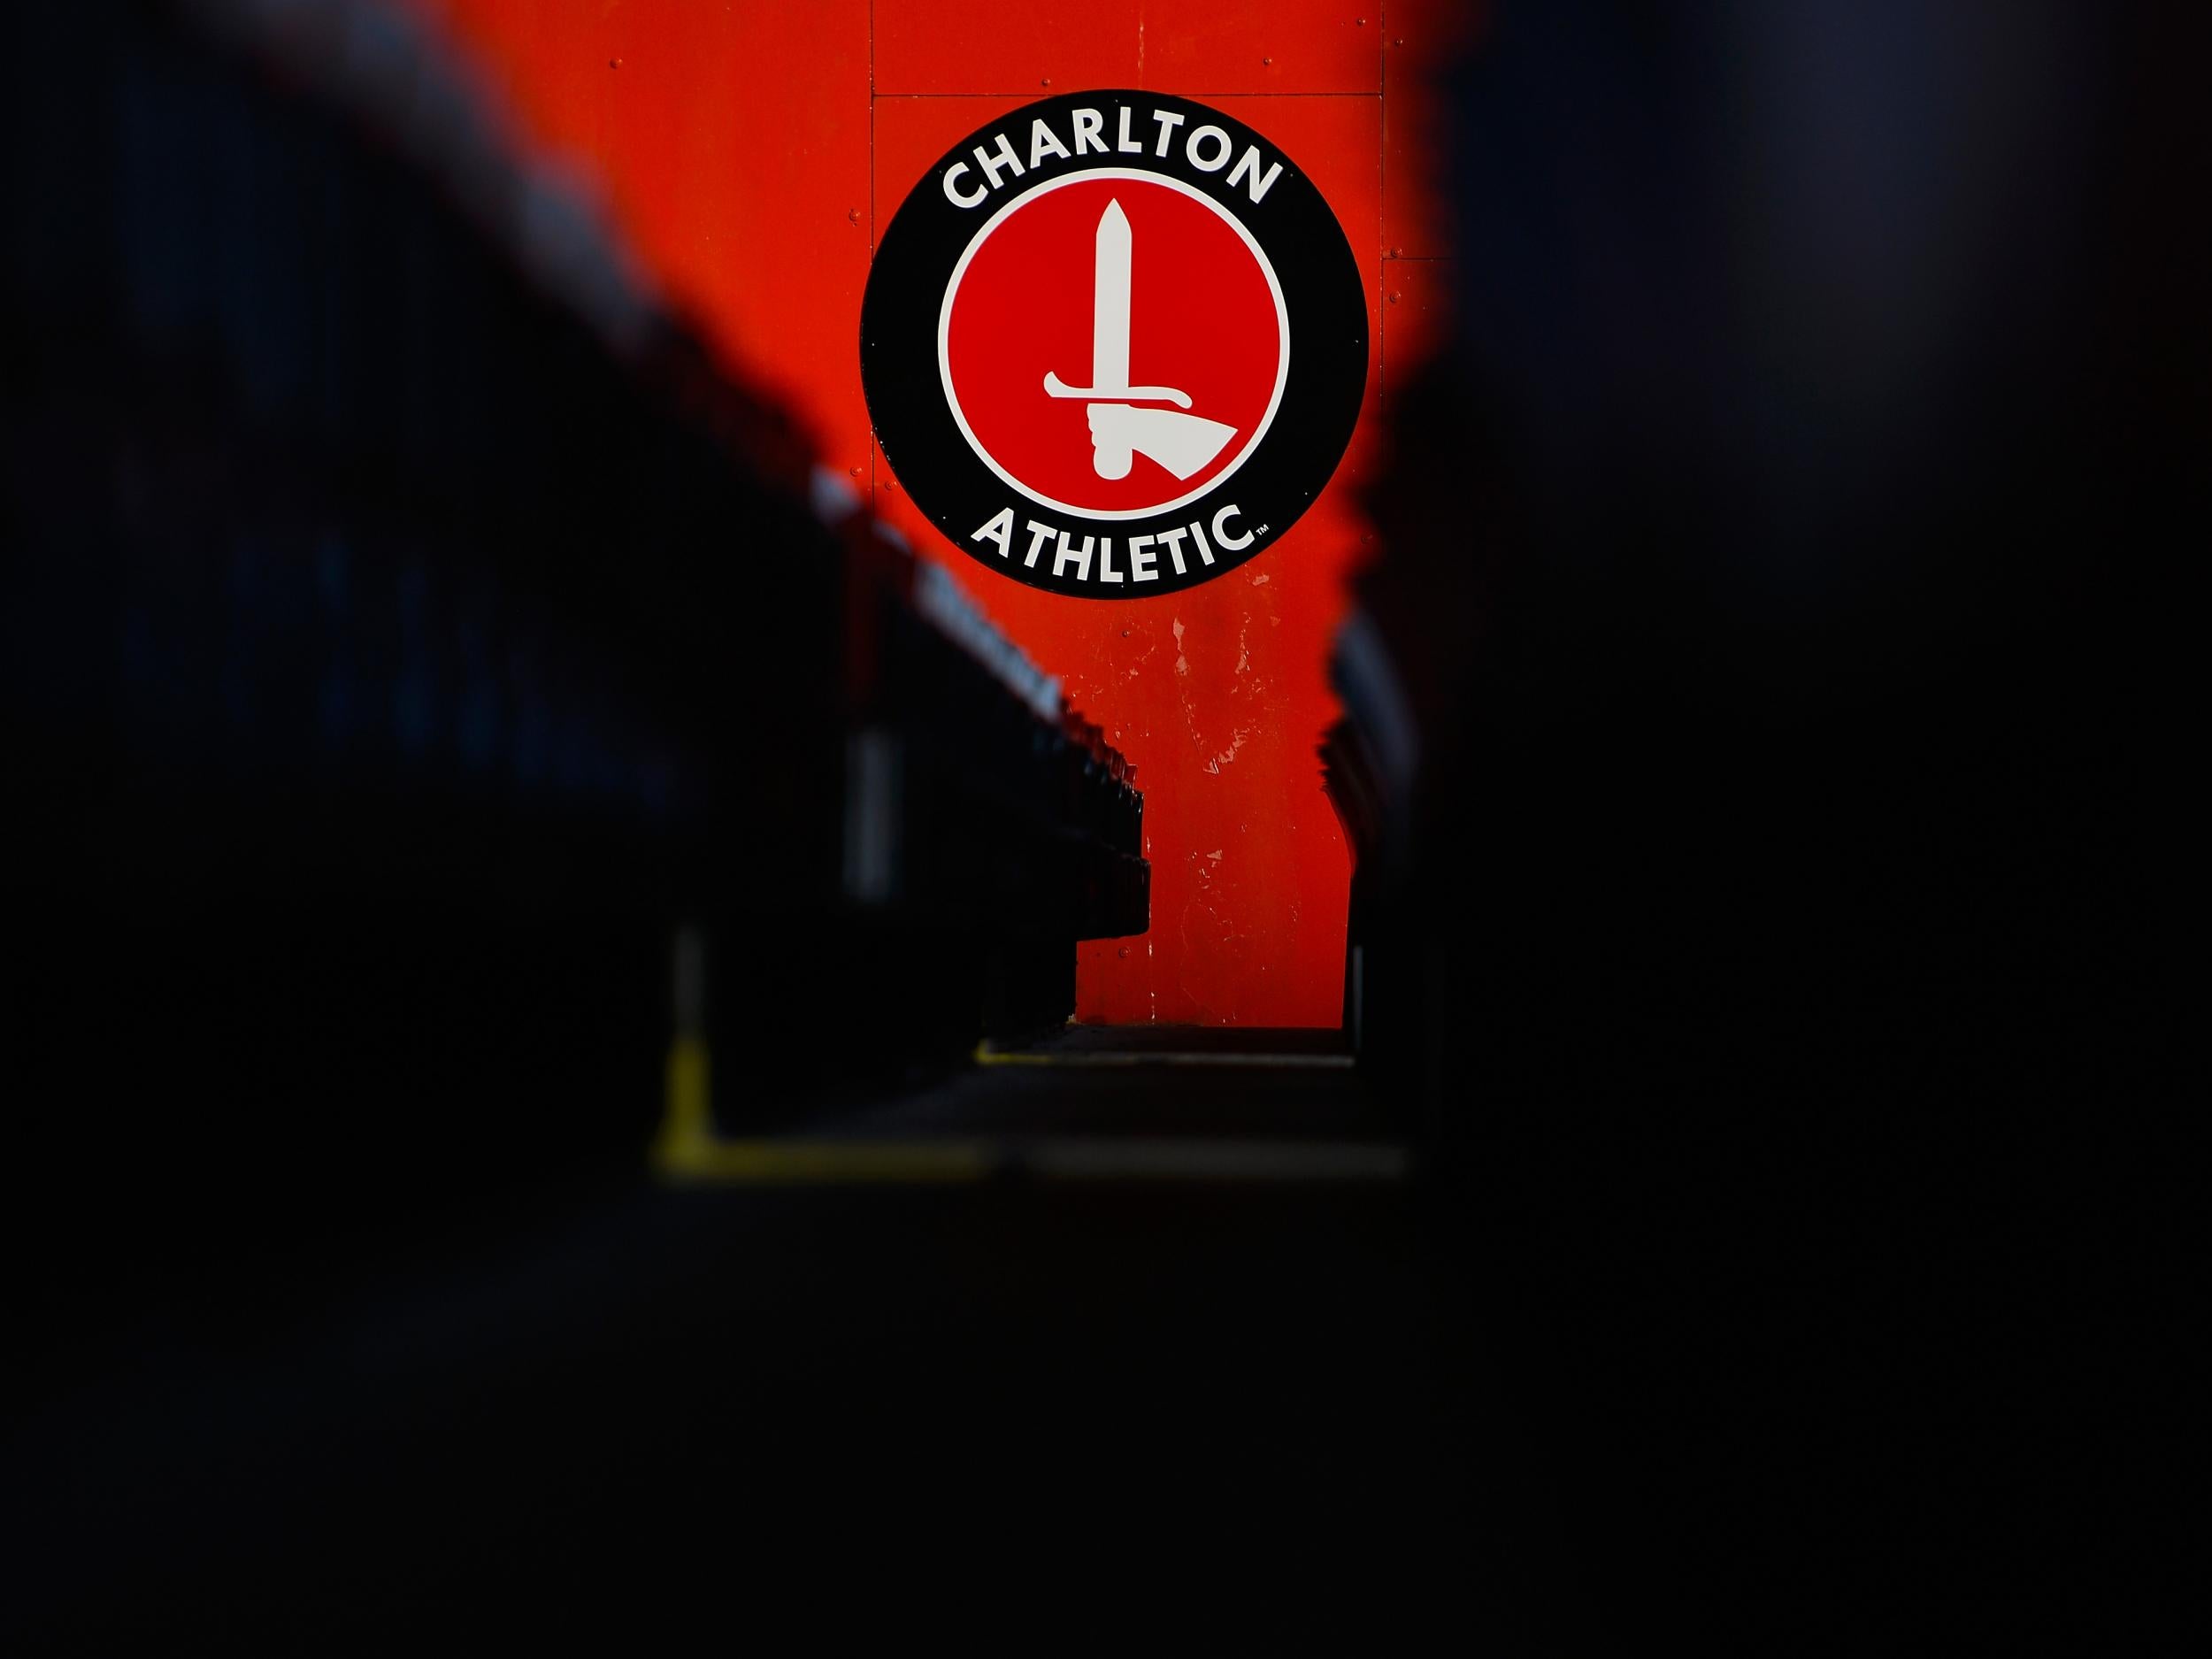 Charlton supporters are fighting to prevent the lights from going out on the club they love